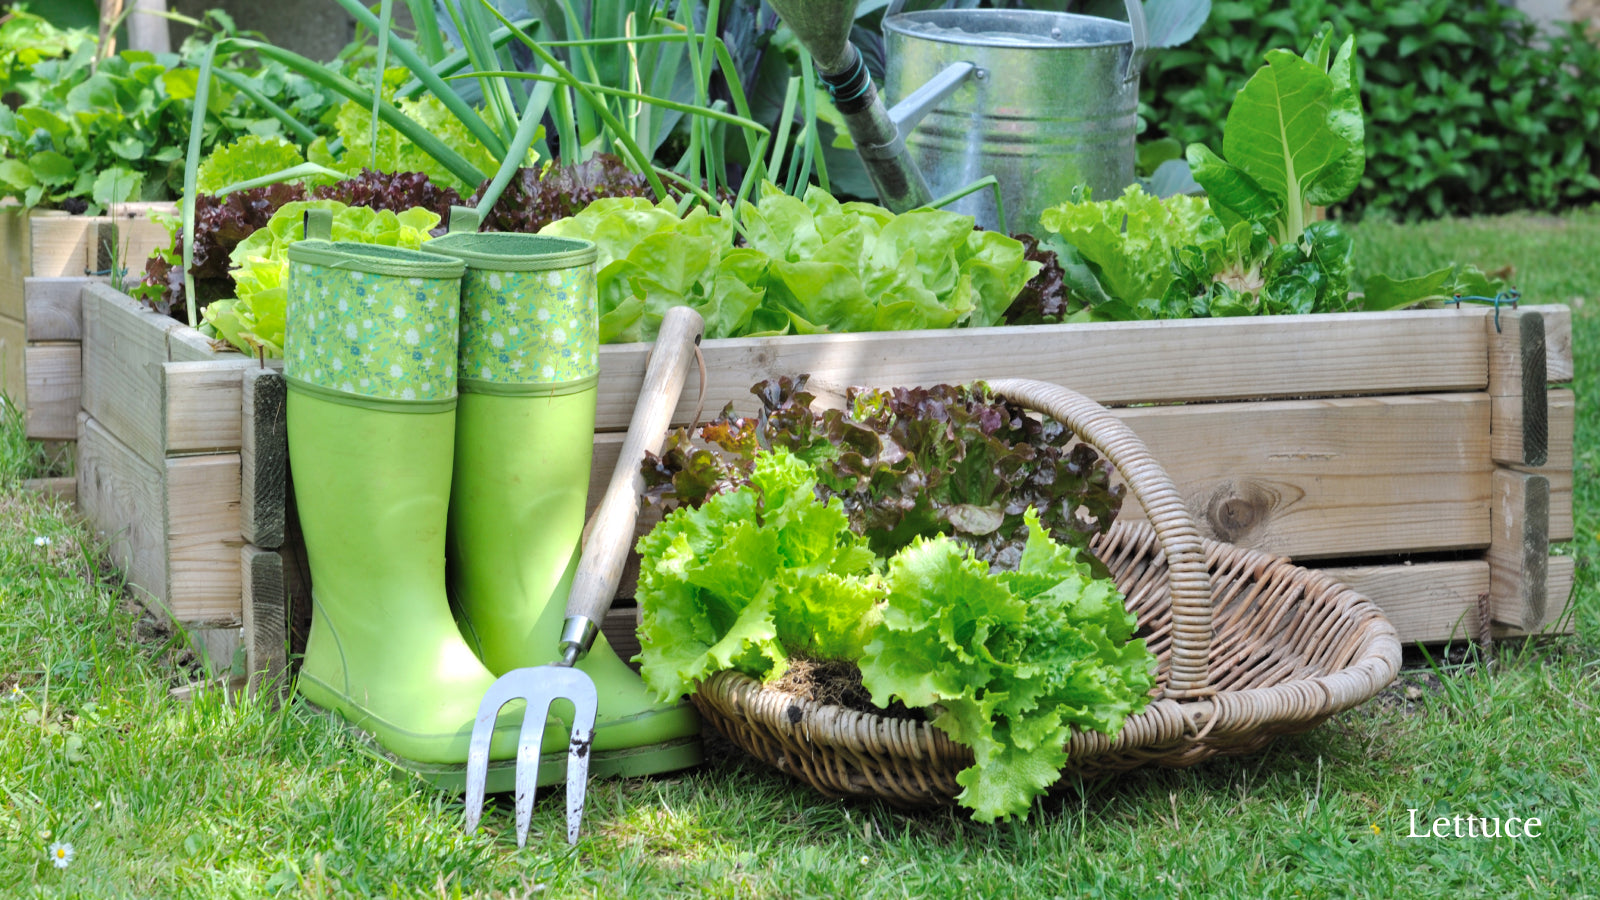 A basket of lettuce harvested from the garden next to garden boots and a rake